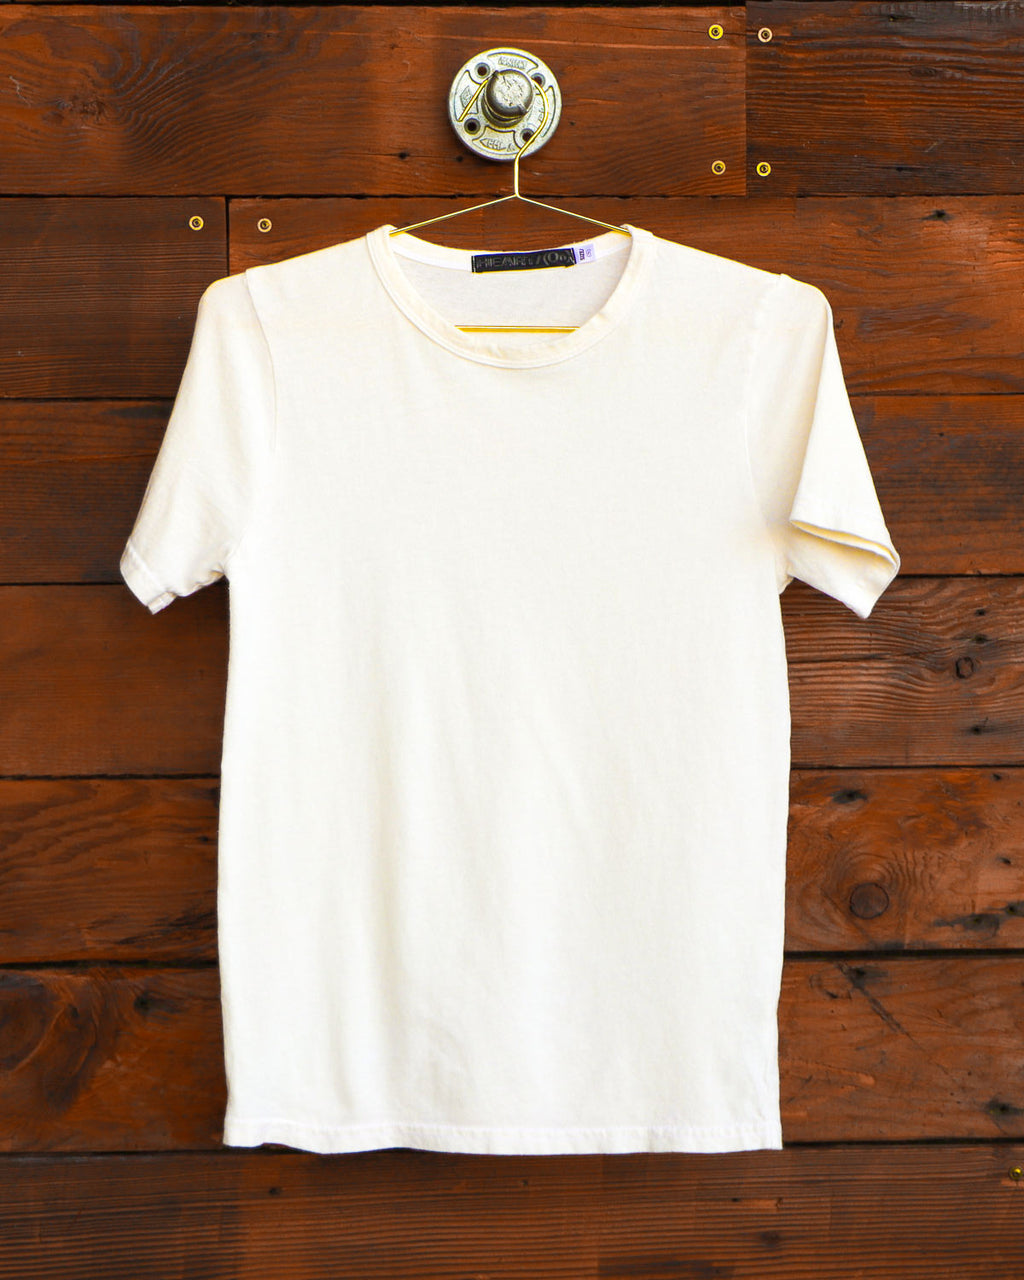 Vintage white t-shirt hanging on wood wall